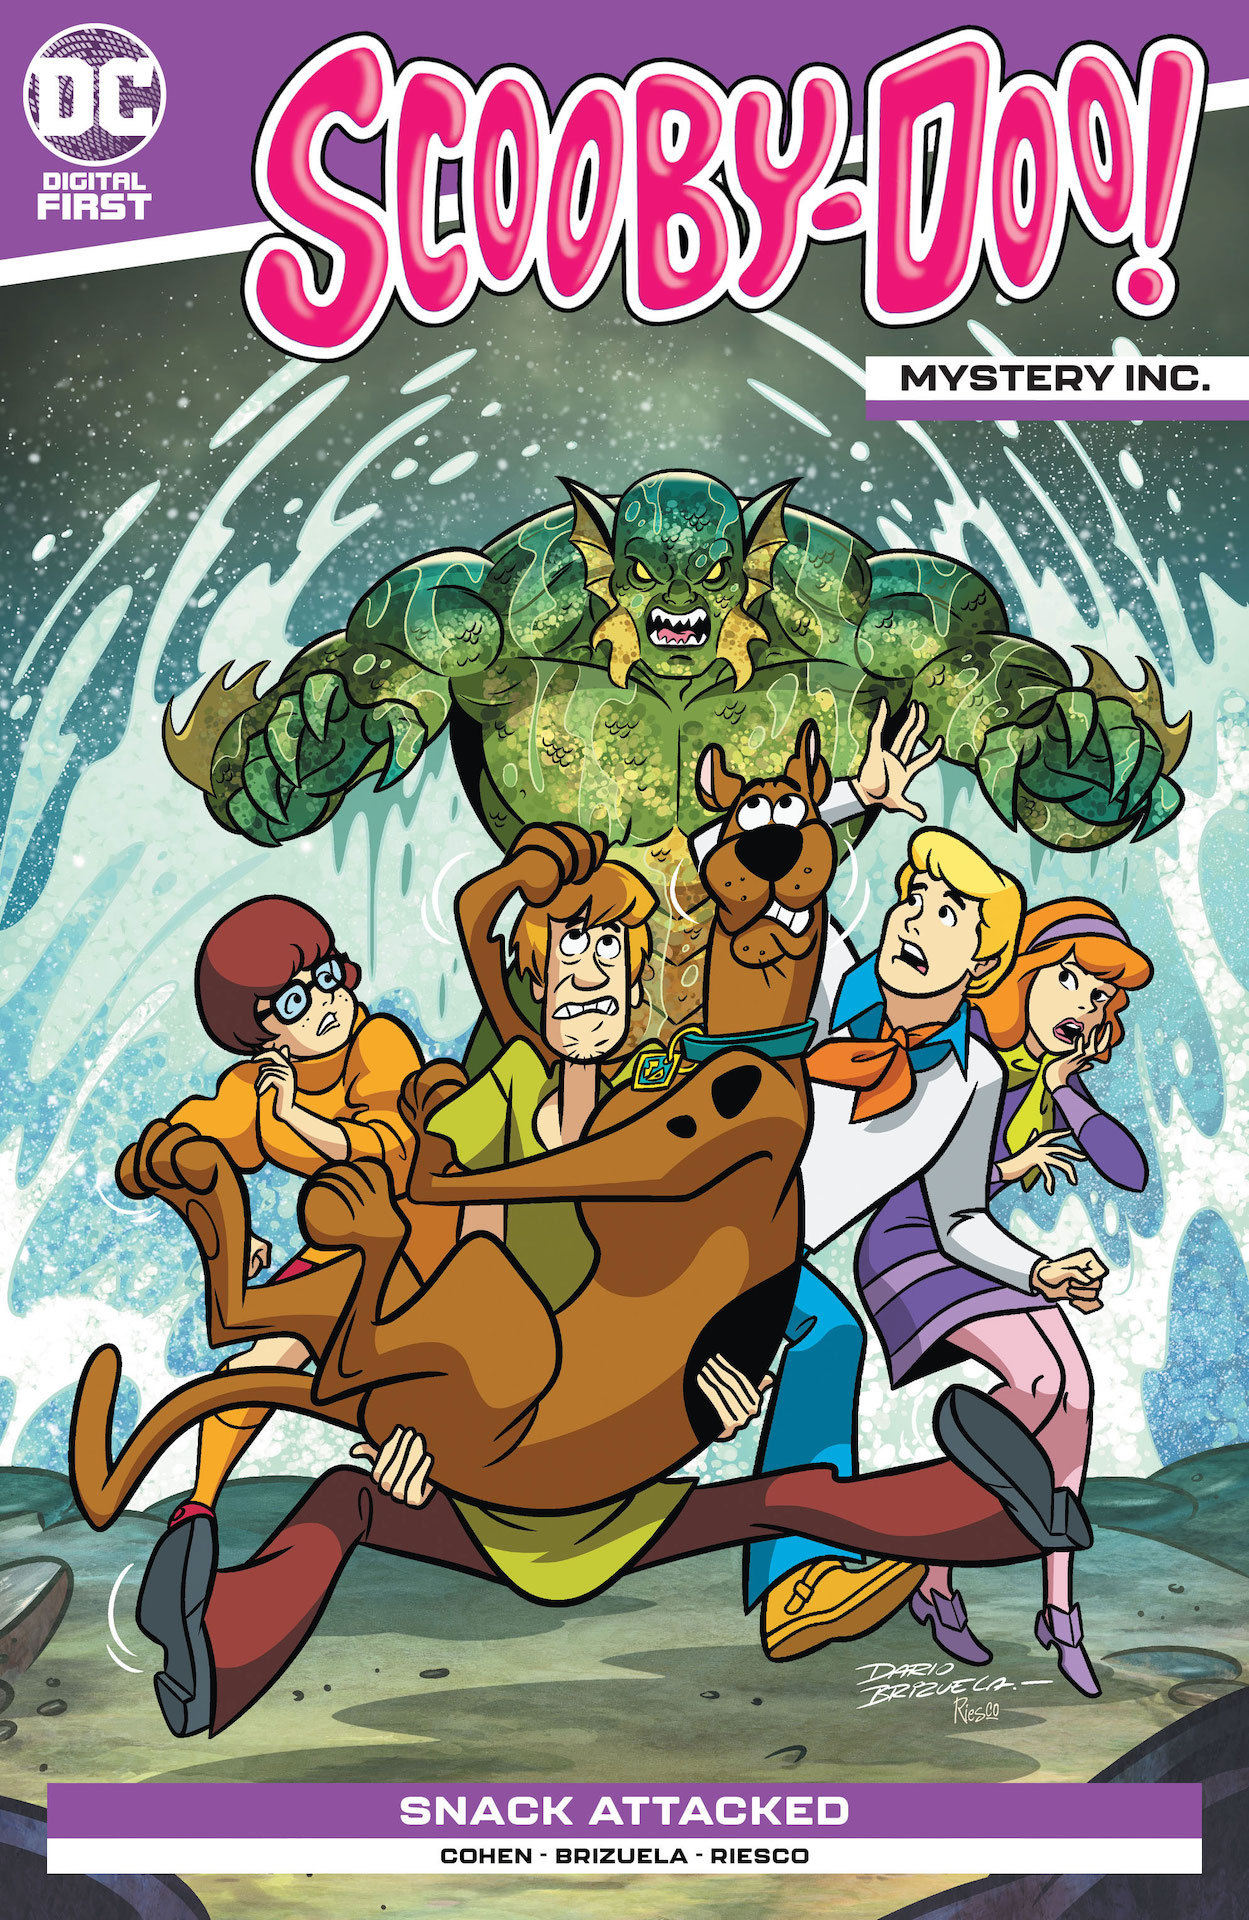 Super Sunday (Part 5): The Scooby Snacks Factory Is In Danger In 'Scooby-Doo  Mystery Inc.' #1 – COMICON